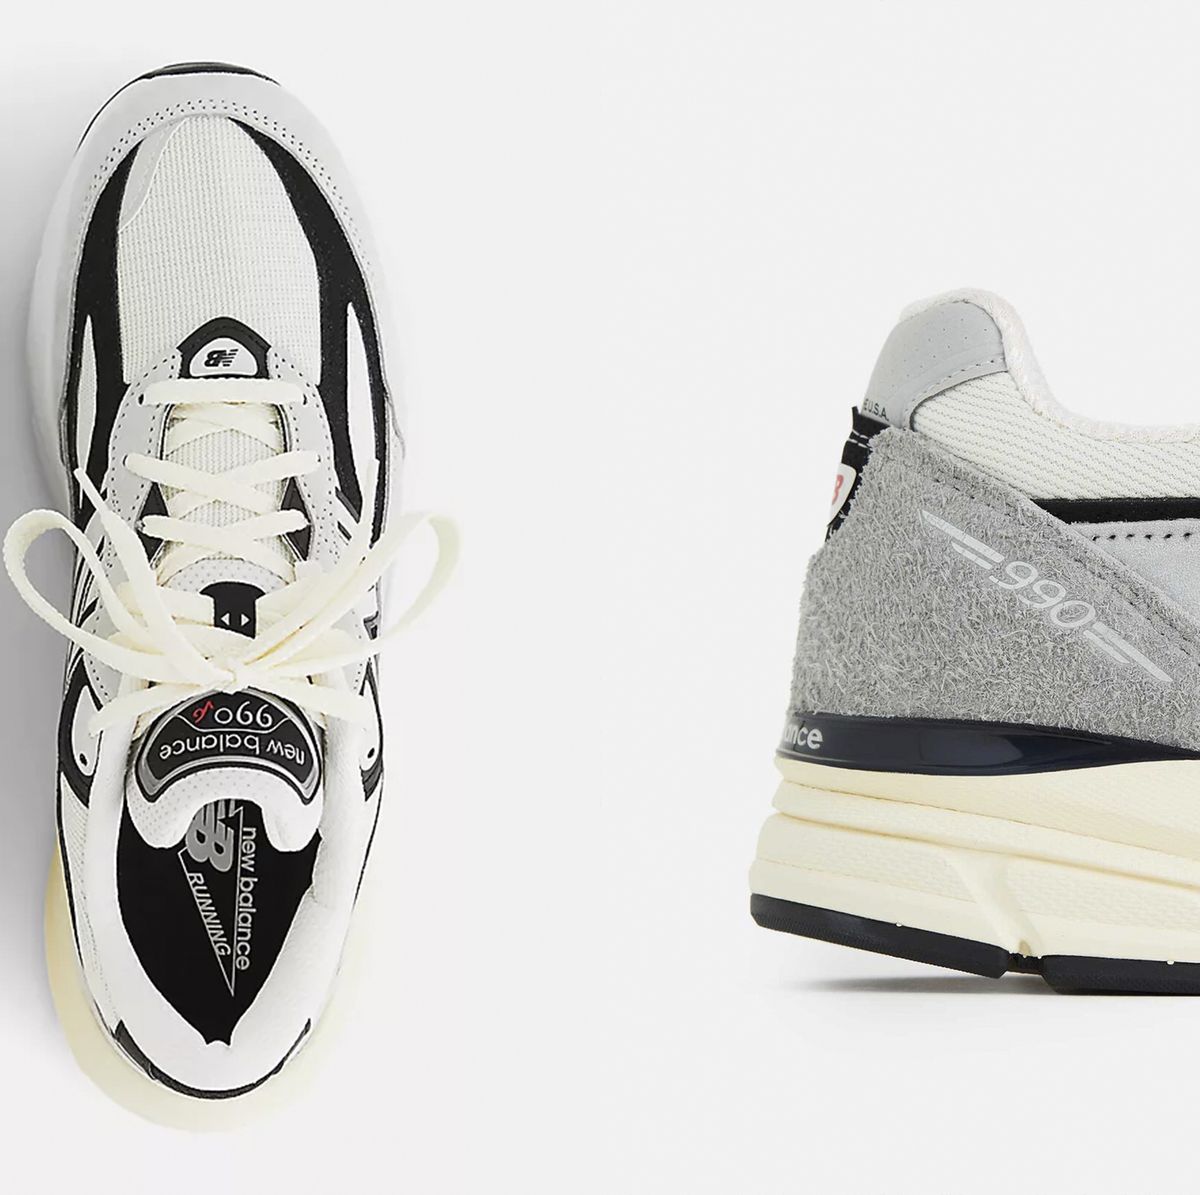 First Look at Teddy Santis's New Balance Collection